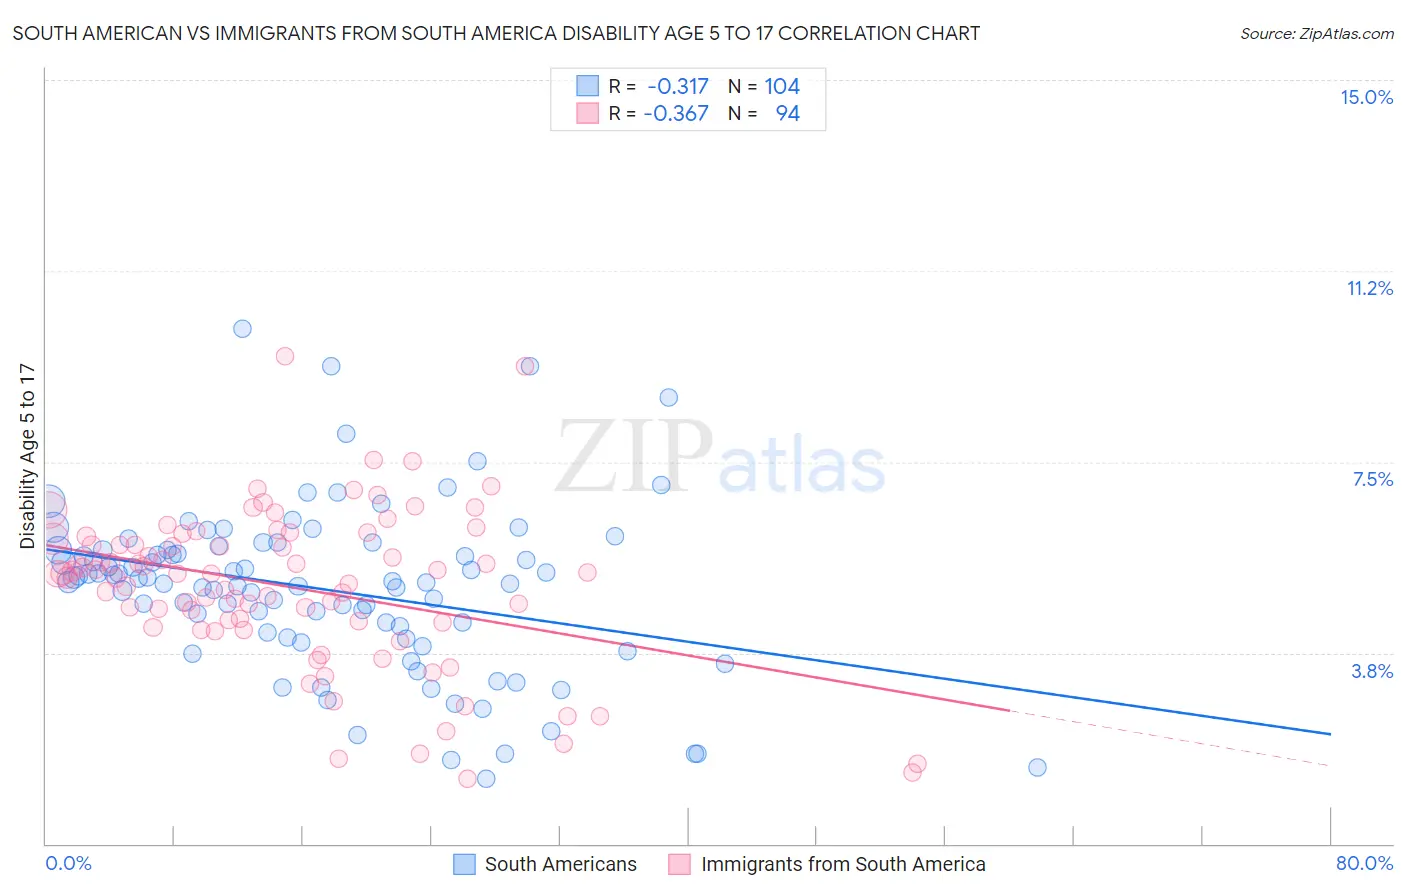 South American vs Immigrants from South America Disability Age 5 to 17